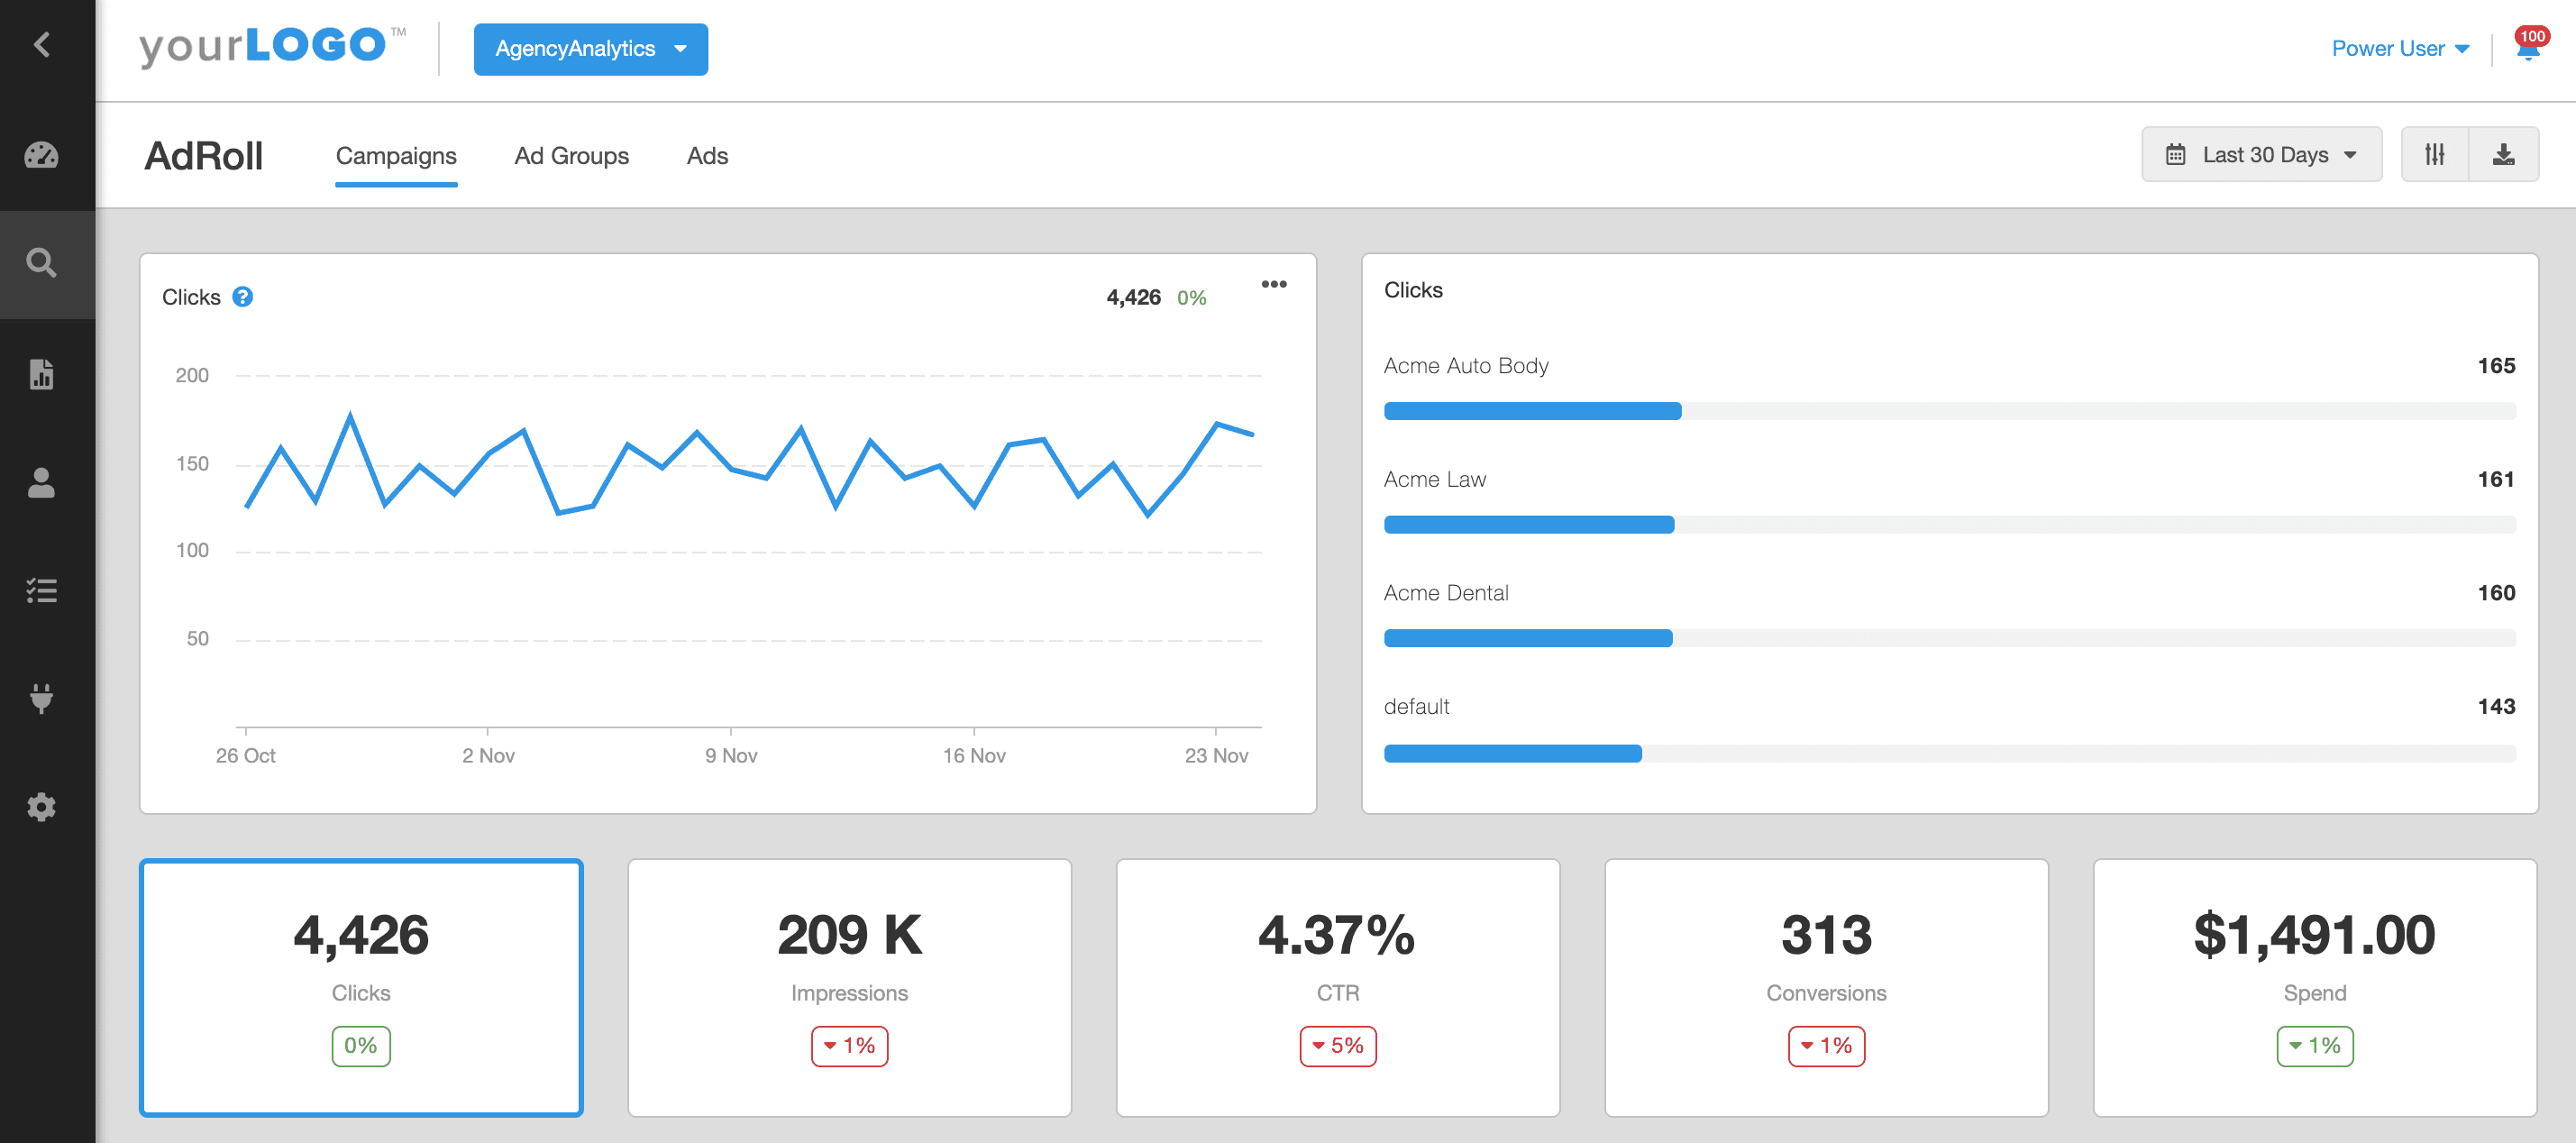 AdRoll Reporting Dashboard Example